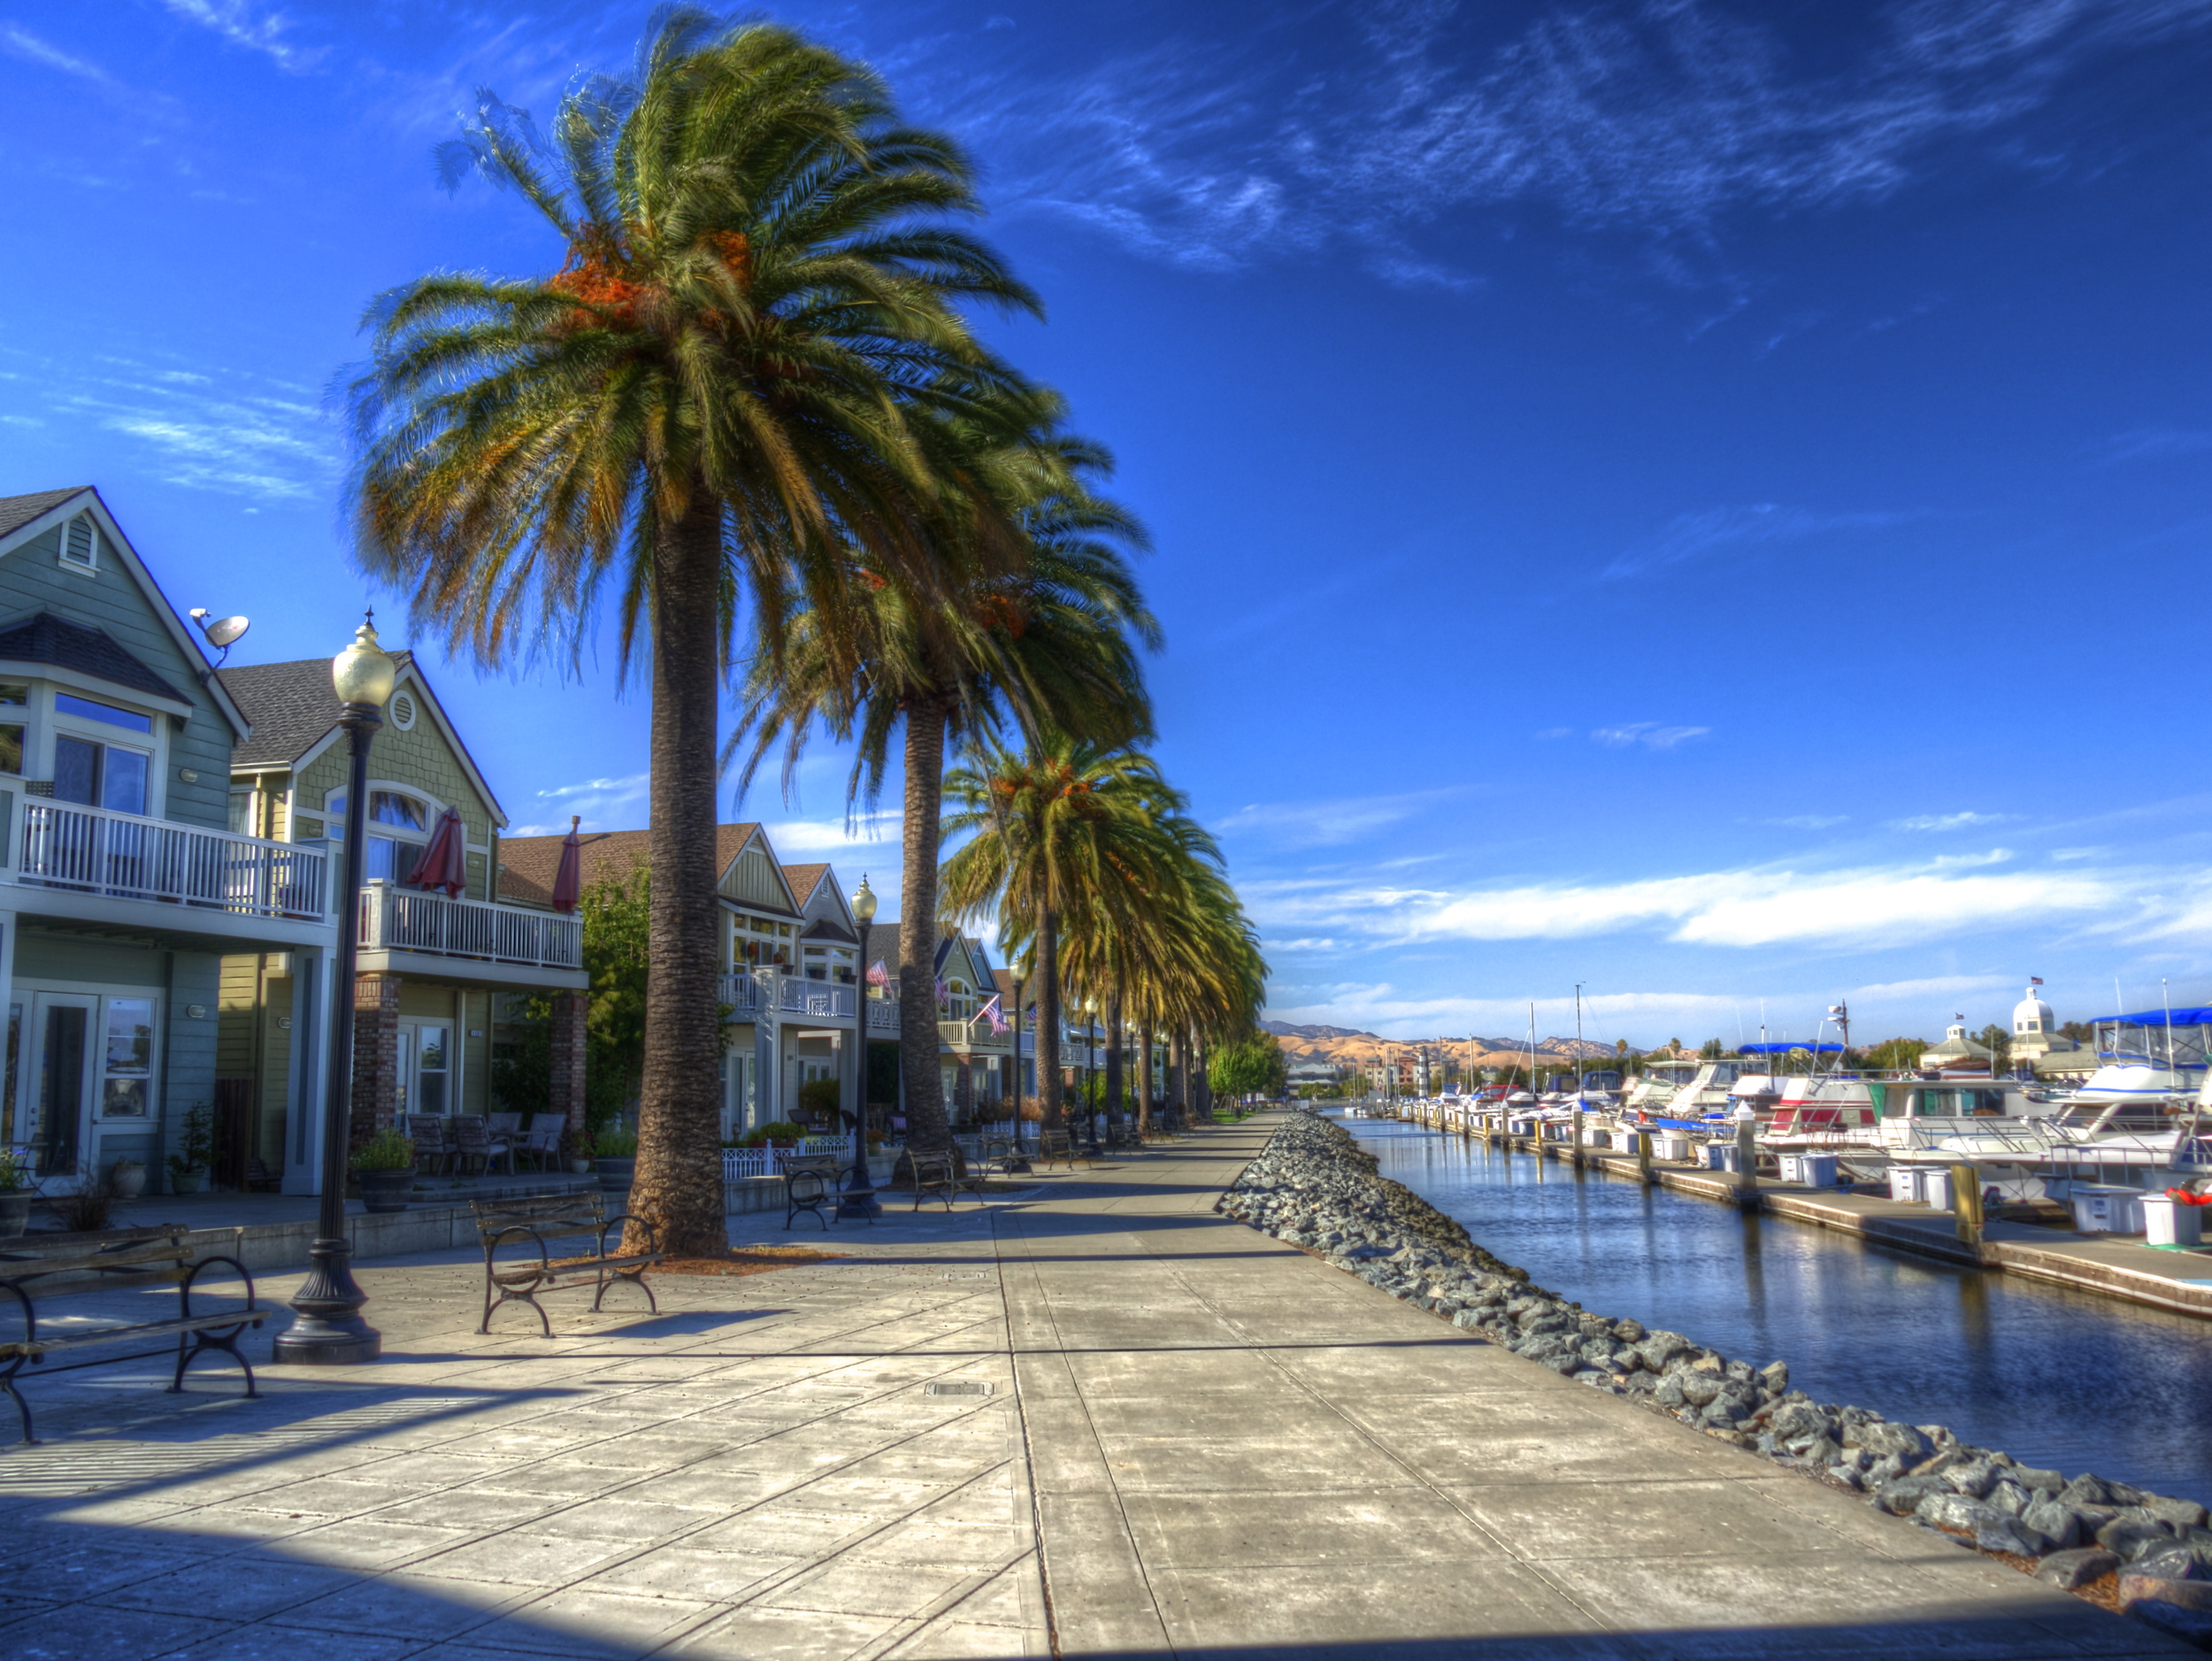 Palm Trees on the Suisun Waterfront